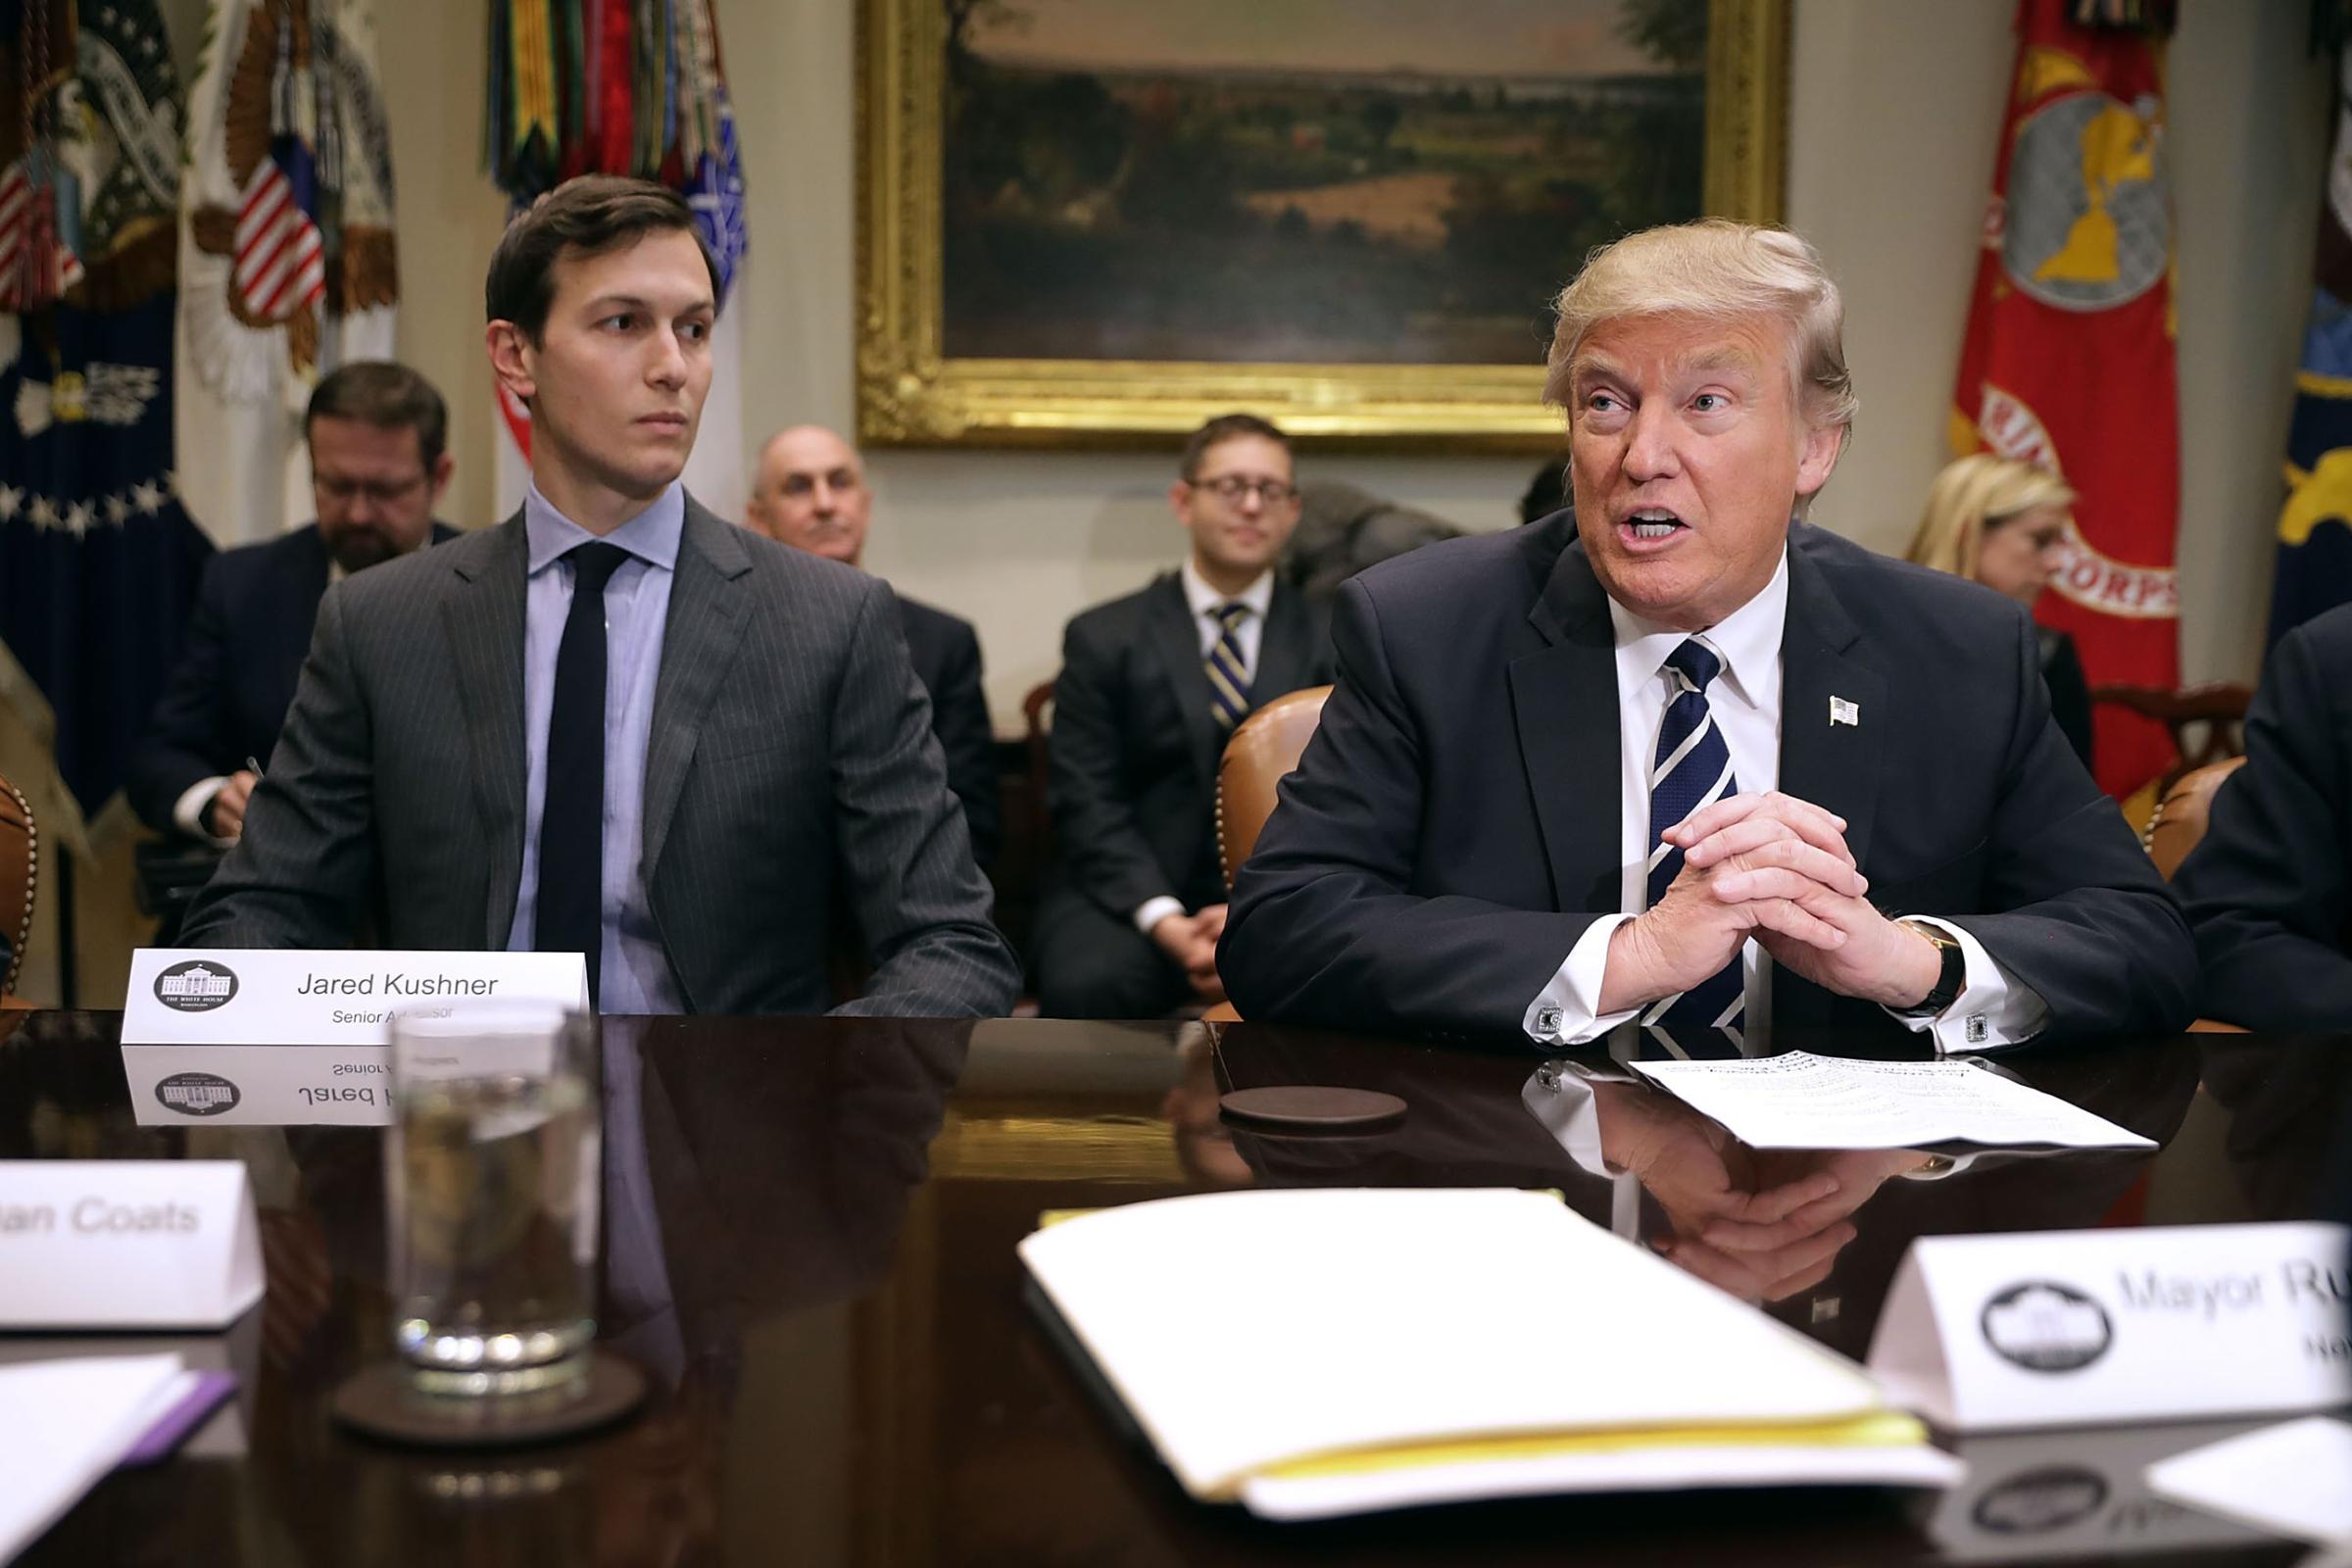 U.S. President Donald Trump (R) delivers remarks at the beginning of a meeting with his son-in-law and Senior Advisor Jared Kushner and government cyber security experts in the Roosevelt Room at the White House in Washington, D.C., Jan. 31, 2017.